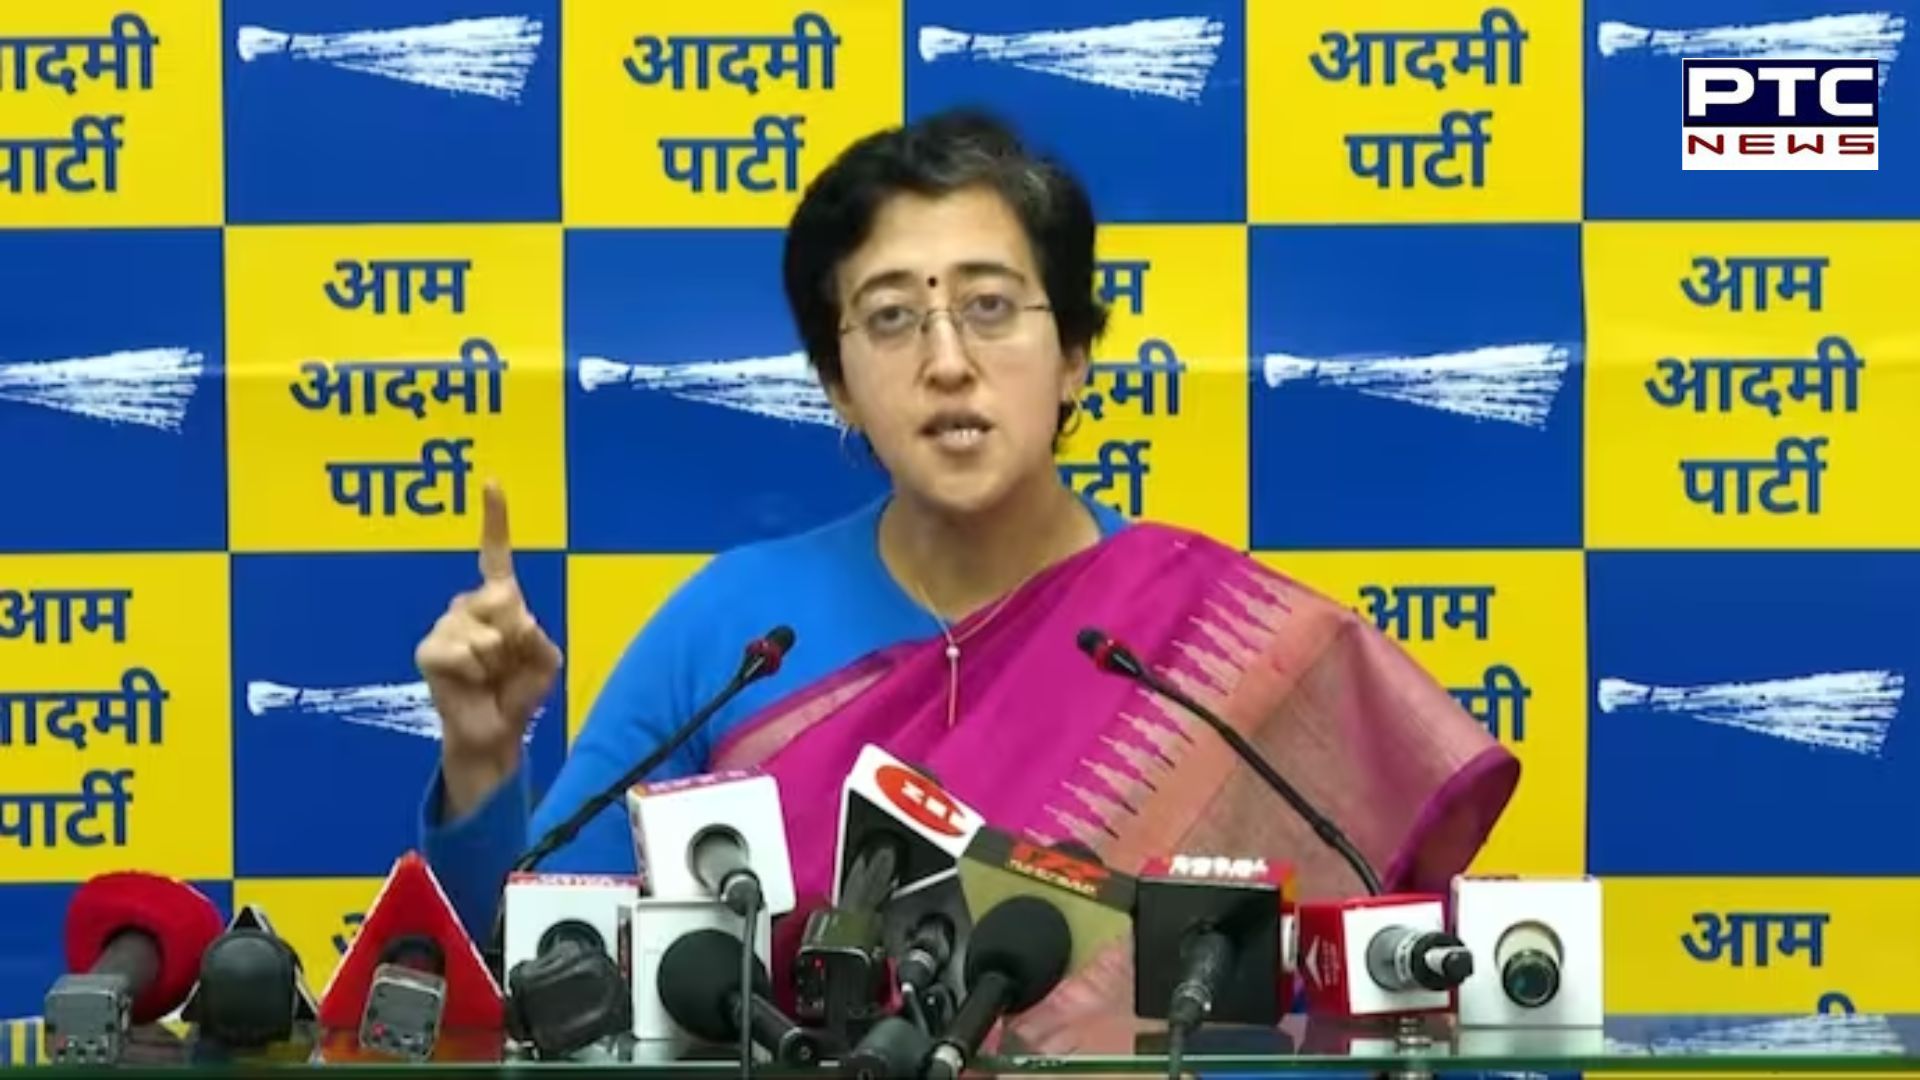 ED to take legal action against AAP leaders following Atishi's exposé: Sources